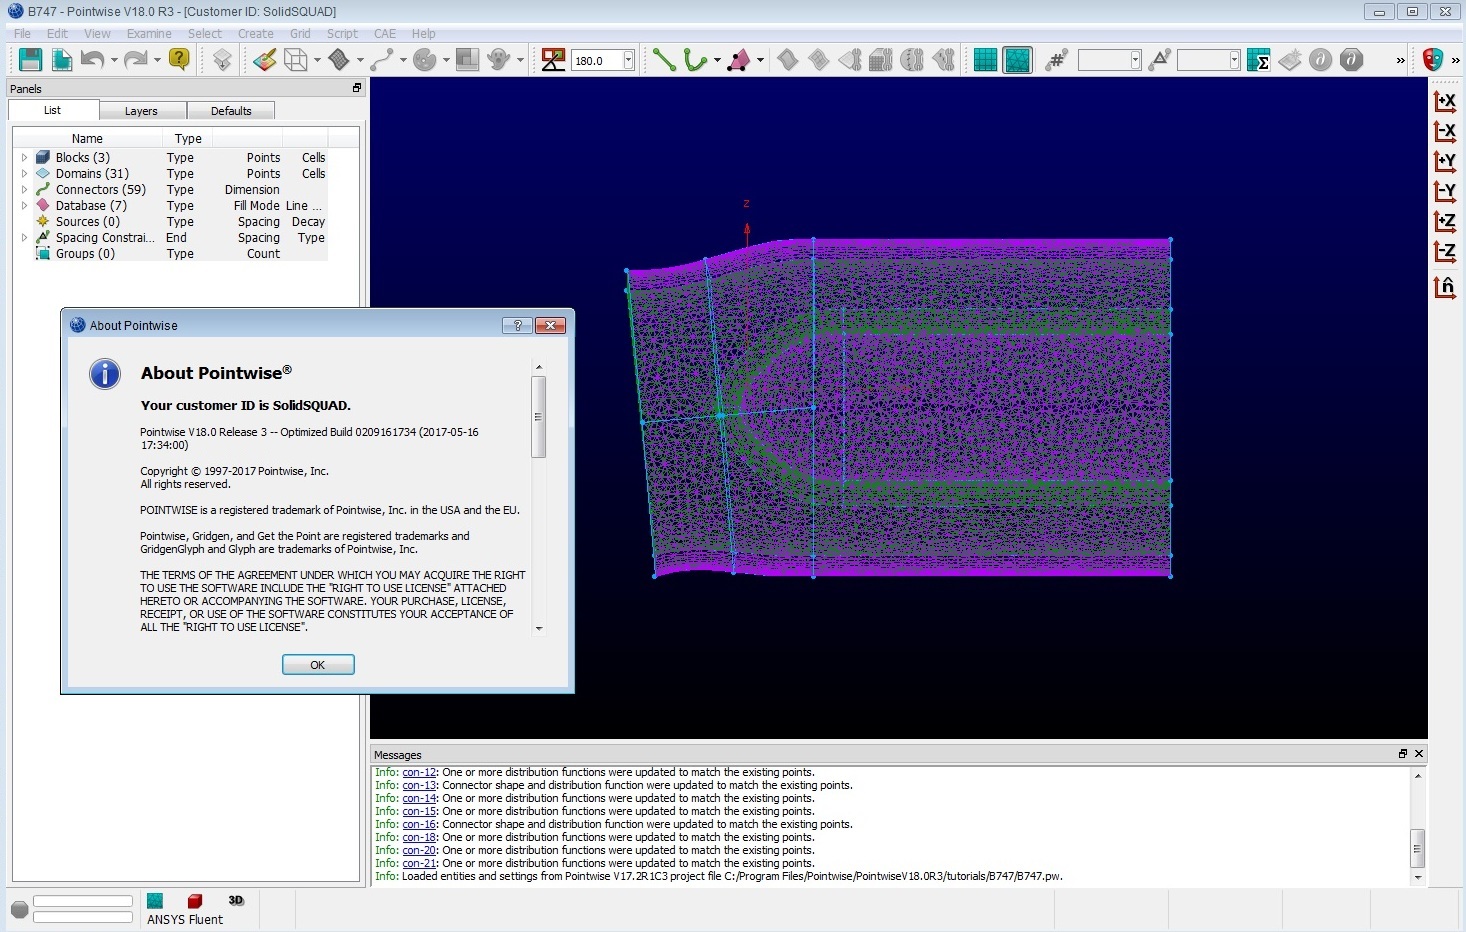 Working with PointWise 18.0 R3 build 2017-05-16 for windows